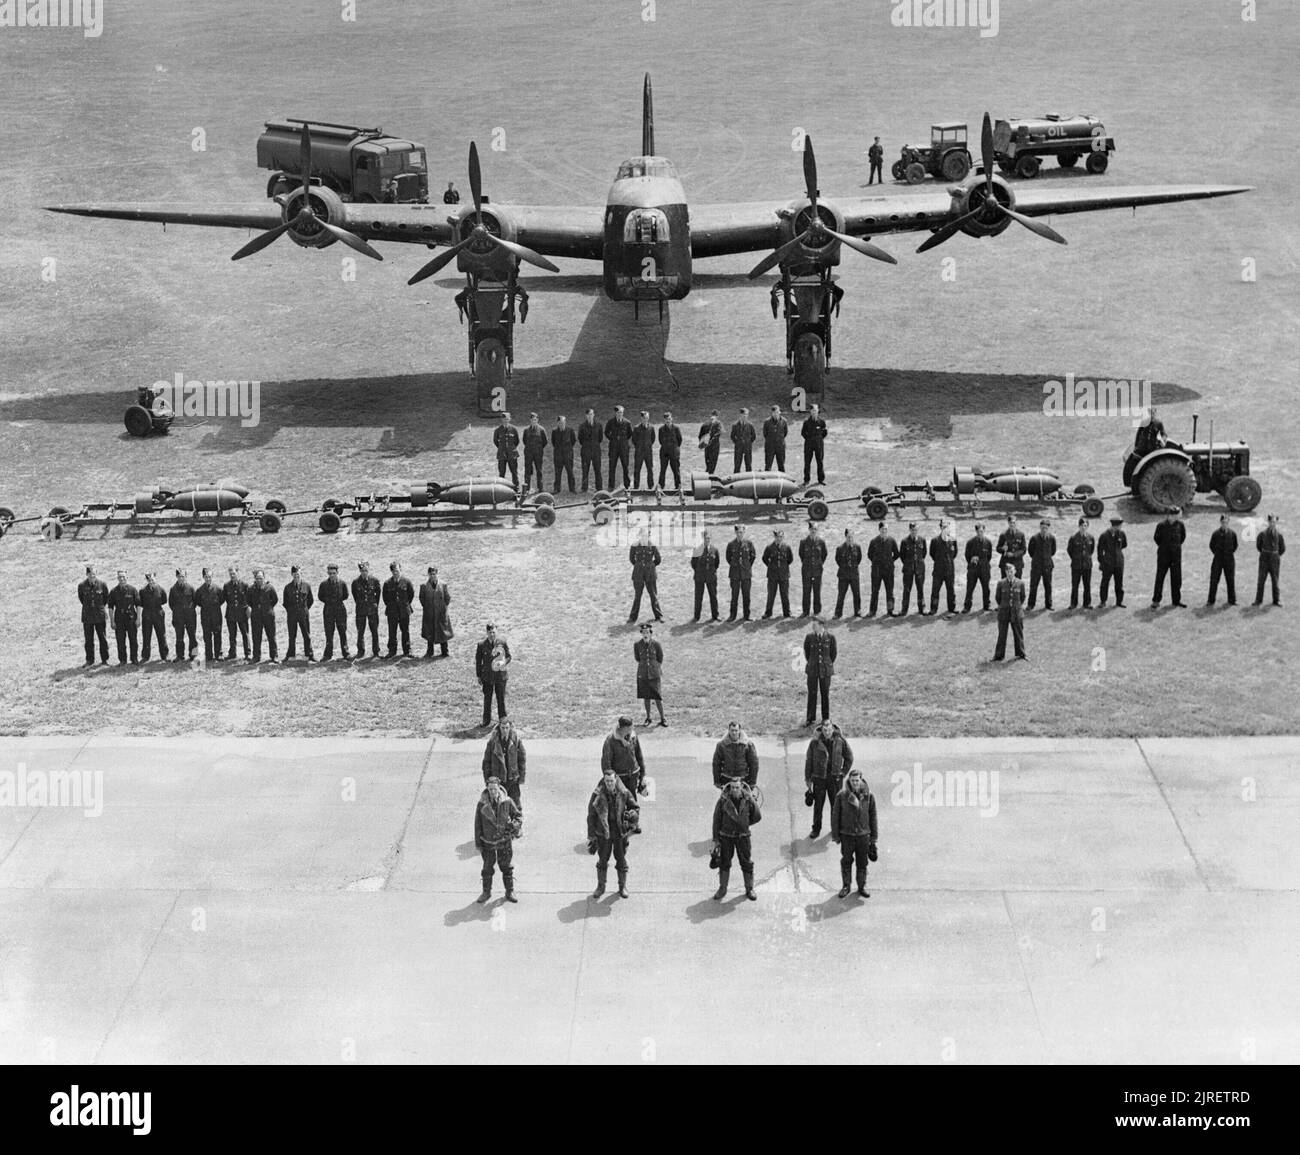 Royal Air Force Bomber Command, 1942-1945. The air and ground crews responsible for the maintenance, servicing and flying of a Short Stirling B Mark I of No. 218 Squadron RAF at Marham, Norfolk. Standing at the front is the aircrew; captain, second pilot, flight engineer, observer (navigator), wireless operator, air gunner/bomb aimer and two air gunners. Behind them stand the meteorological officer, a WAAF parachute packer and the Flying Control officer. In the third rank stand 12 flight maintenance crew and 18 ground servicing crew, and behind them the tractor driver with his bomb-train in fr Stock Photo